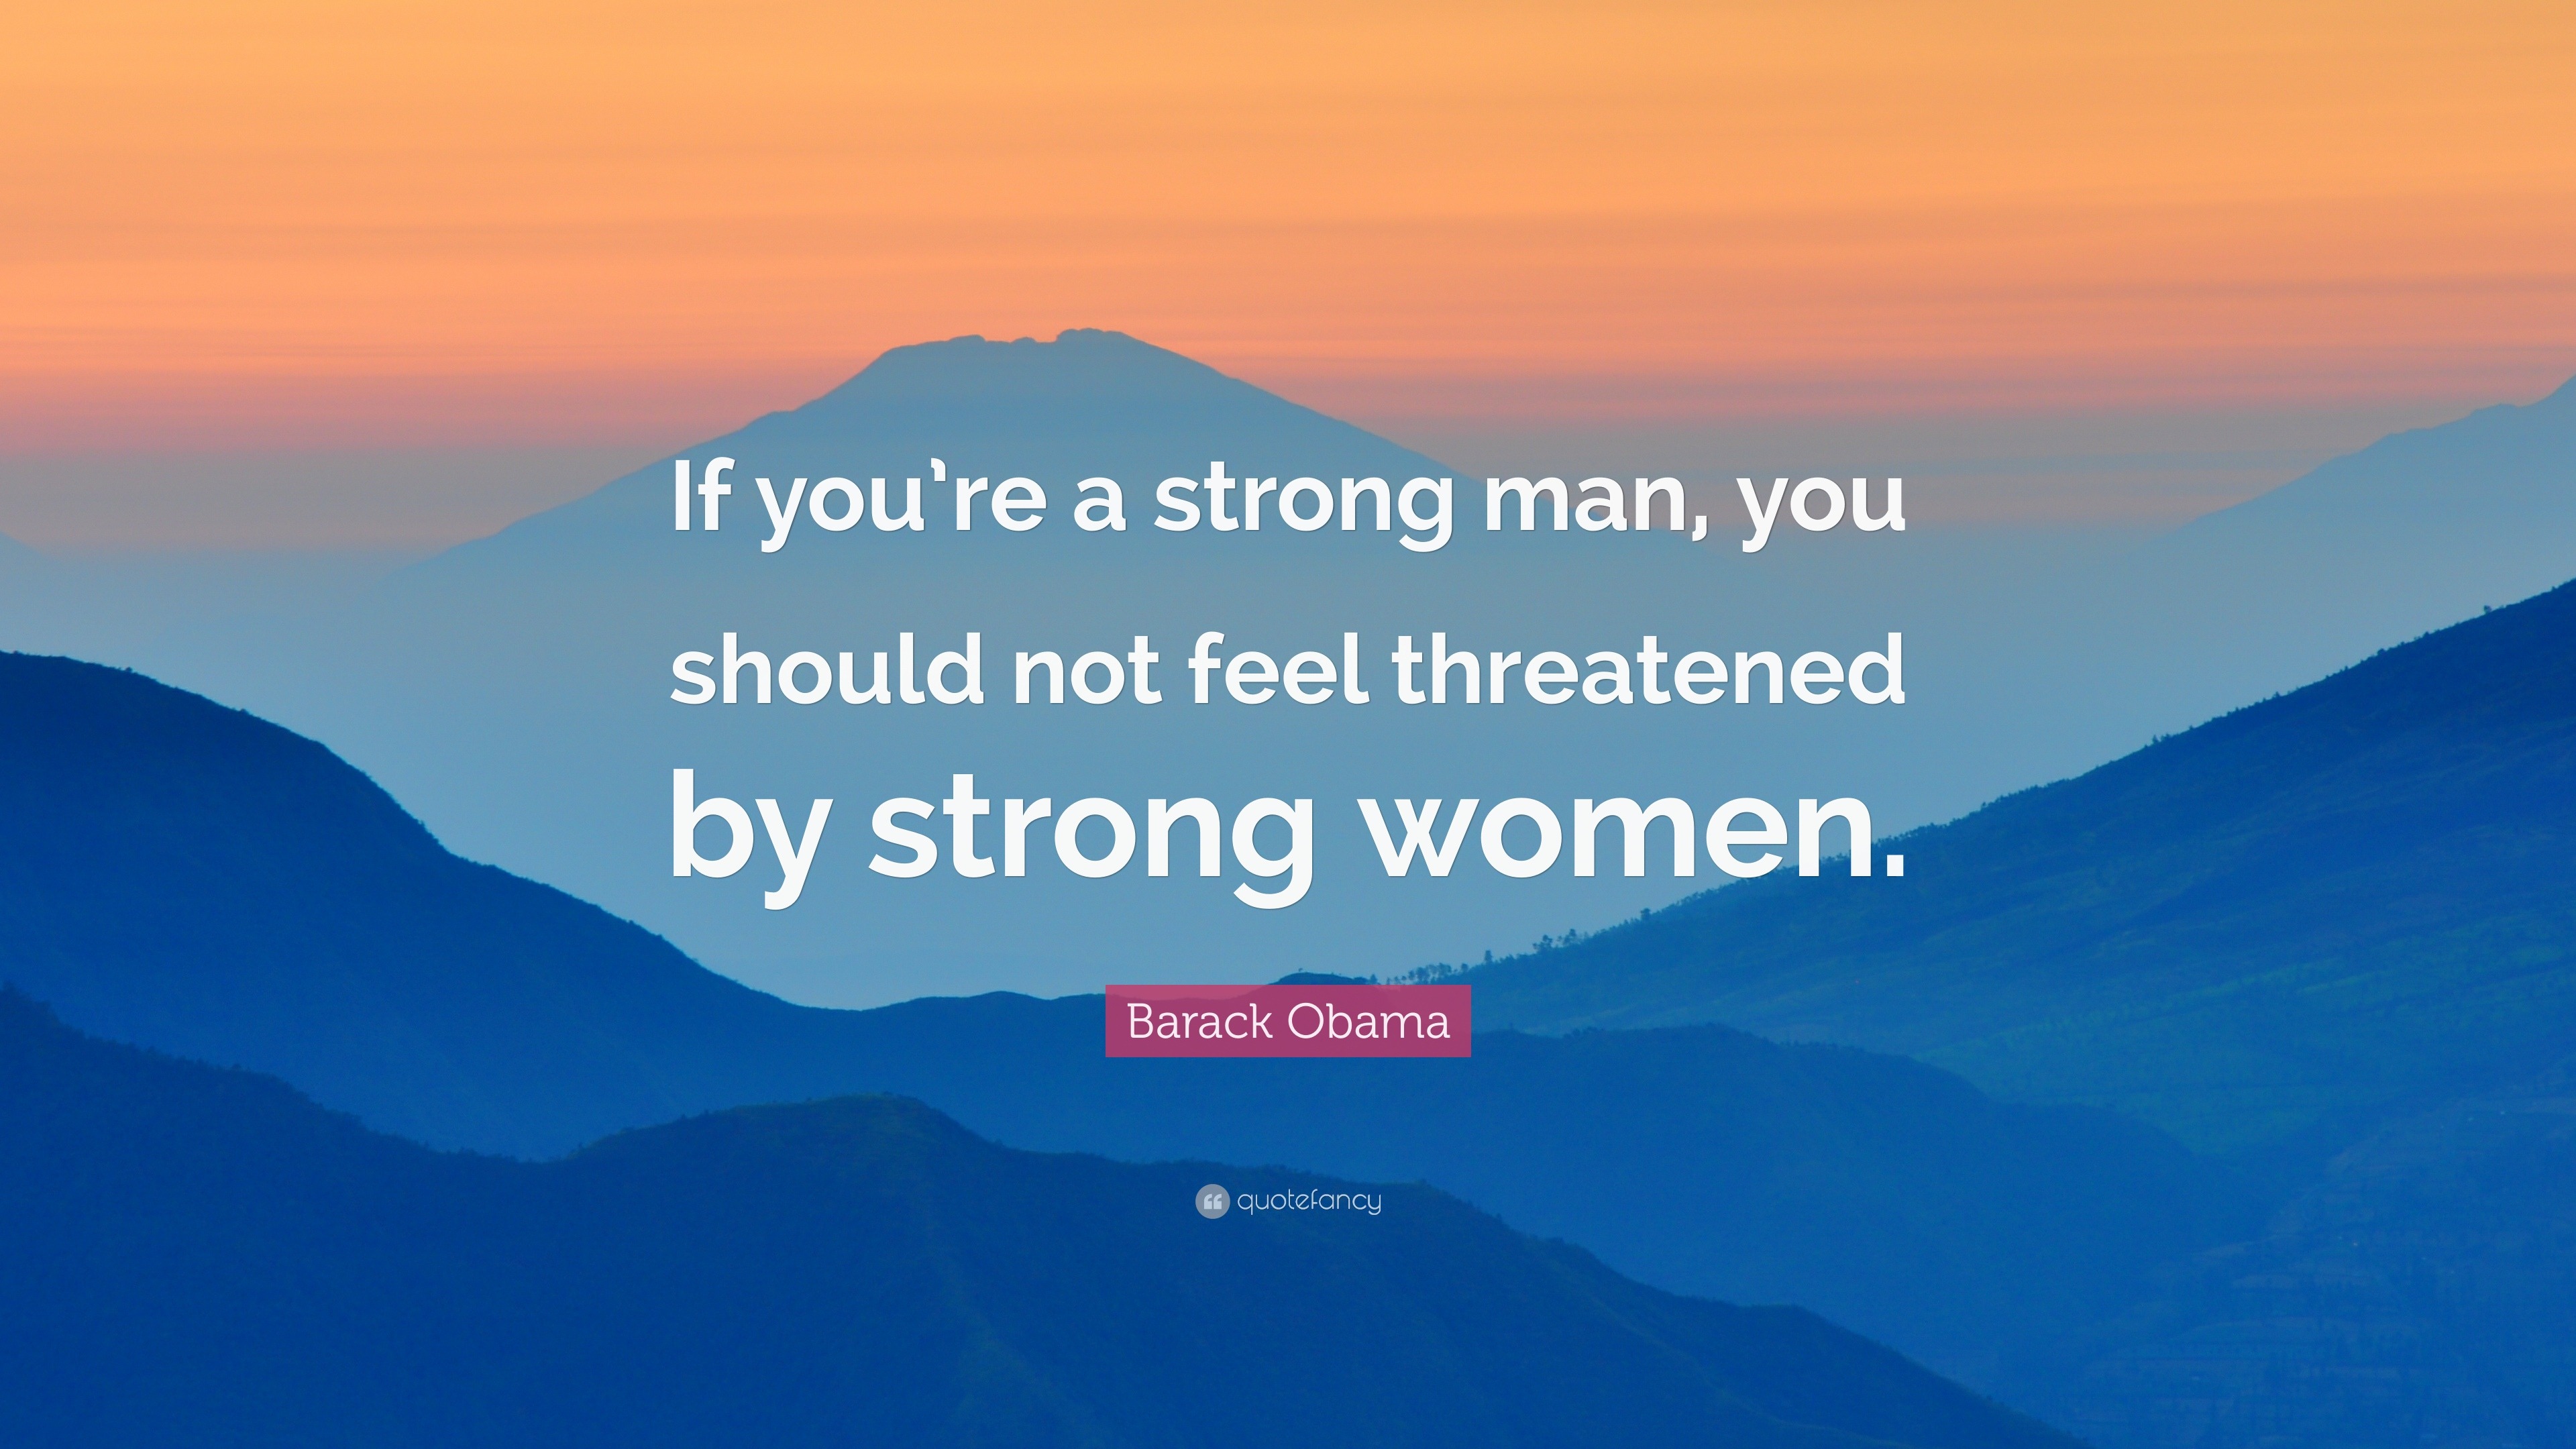 Barack Obama Quote: “If you’re a strong man, you should not feel ...